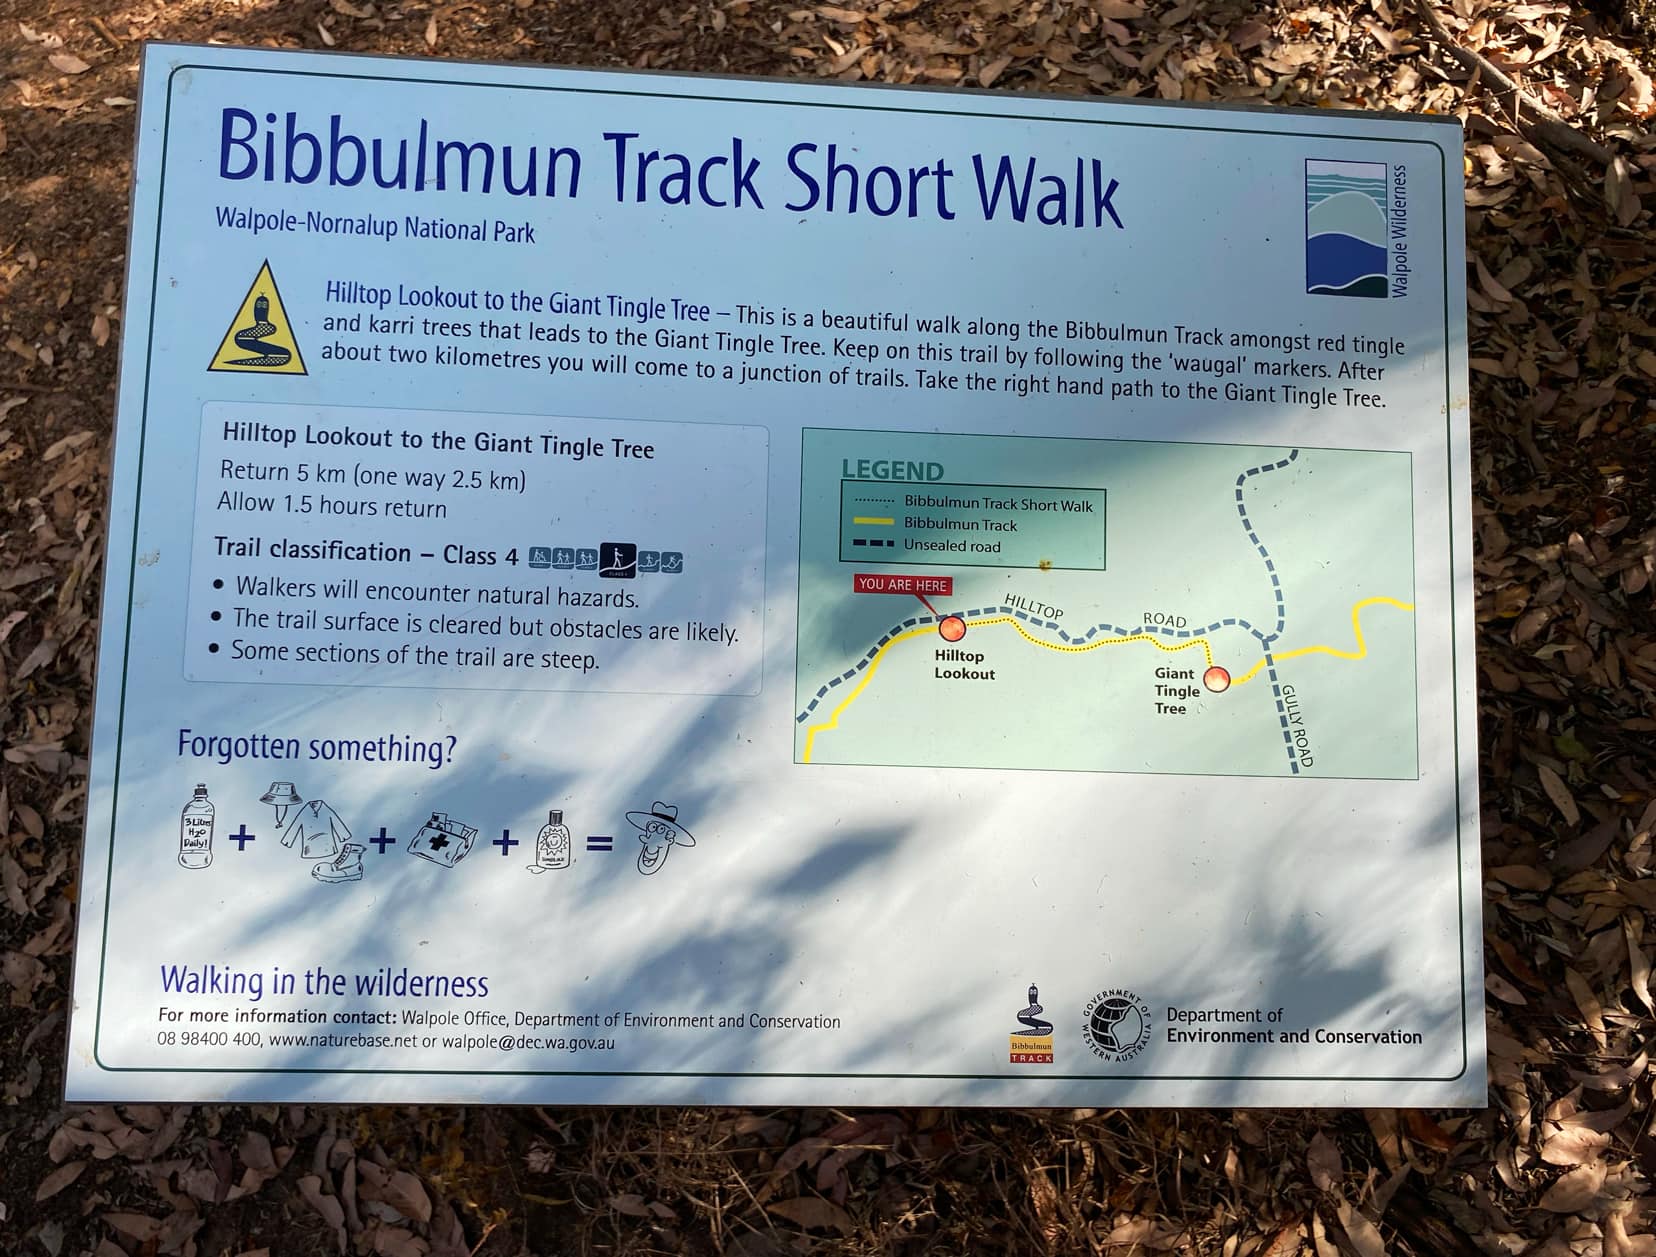 The sign showing the details of the walk from hilltop lookout to the giant tingle tree 